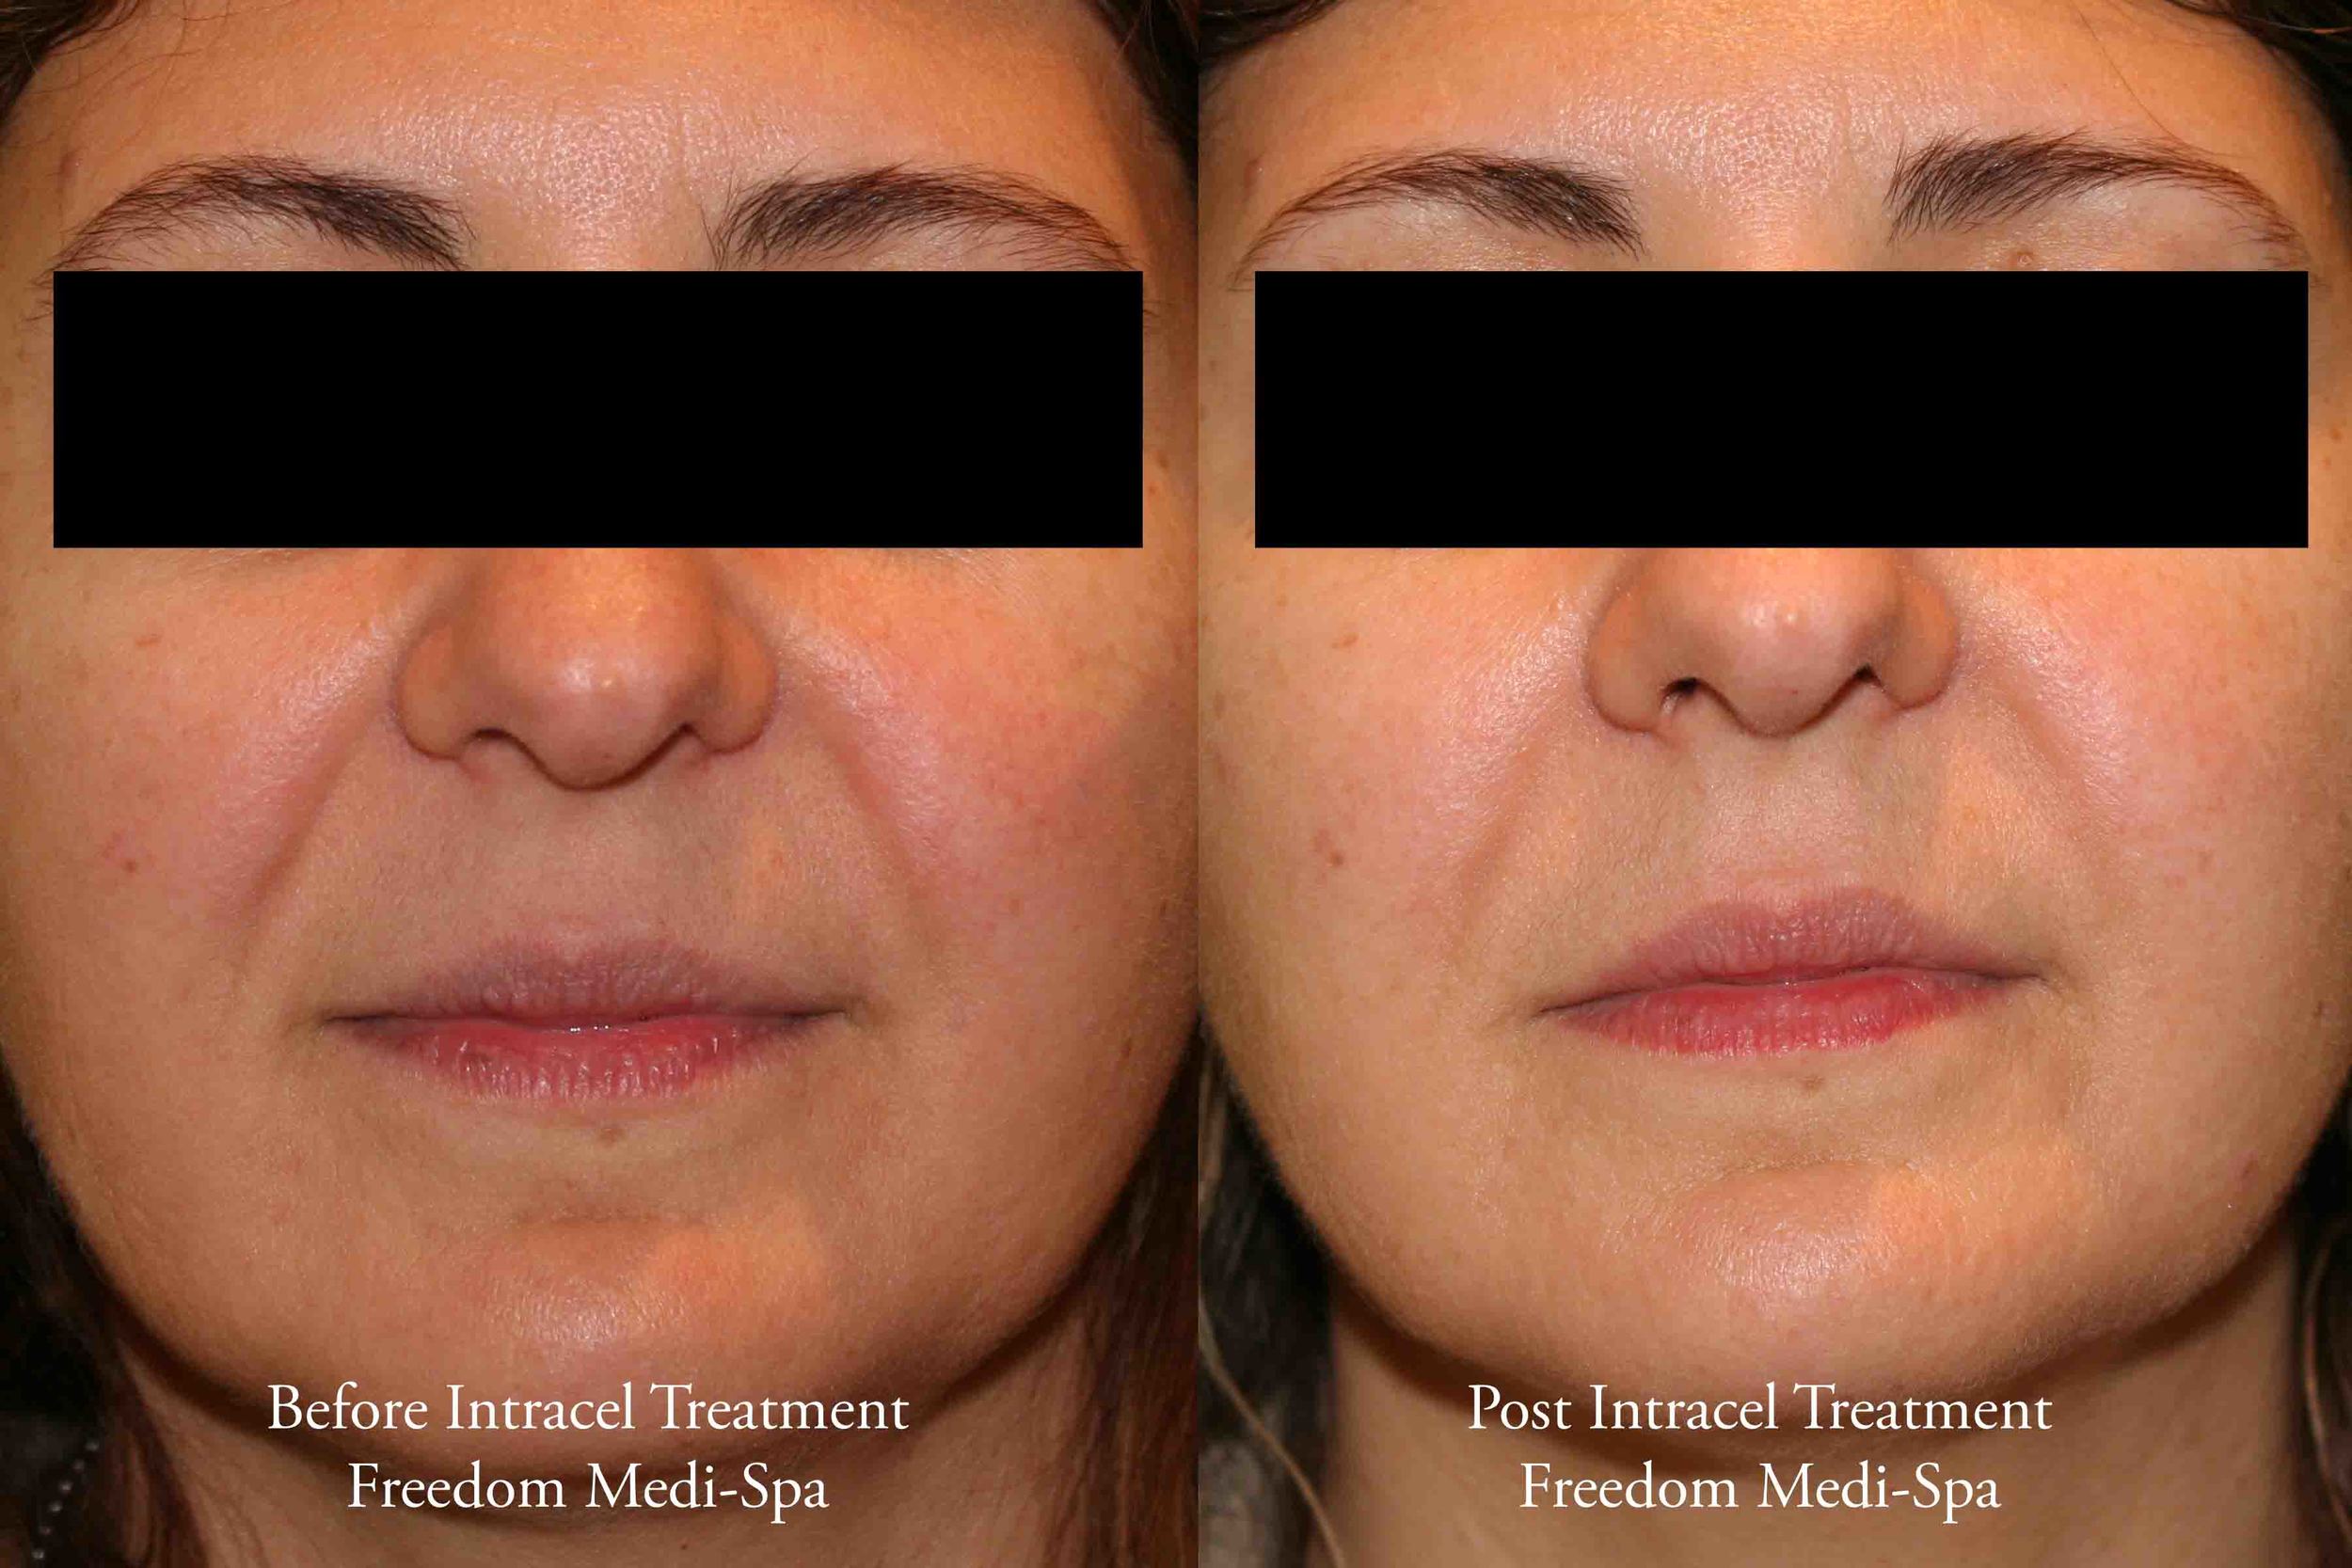 Before and After - Intracel Treatment May 2015.jpg